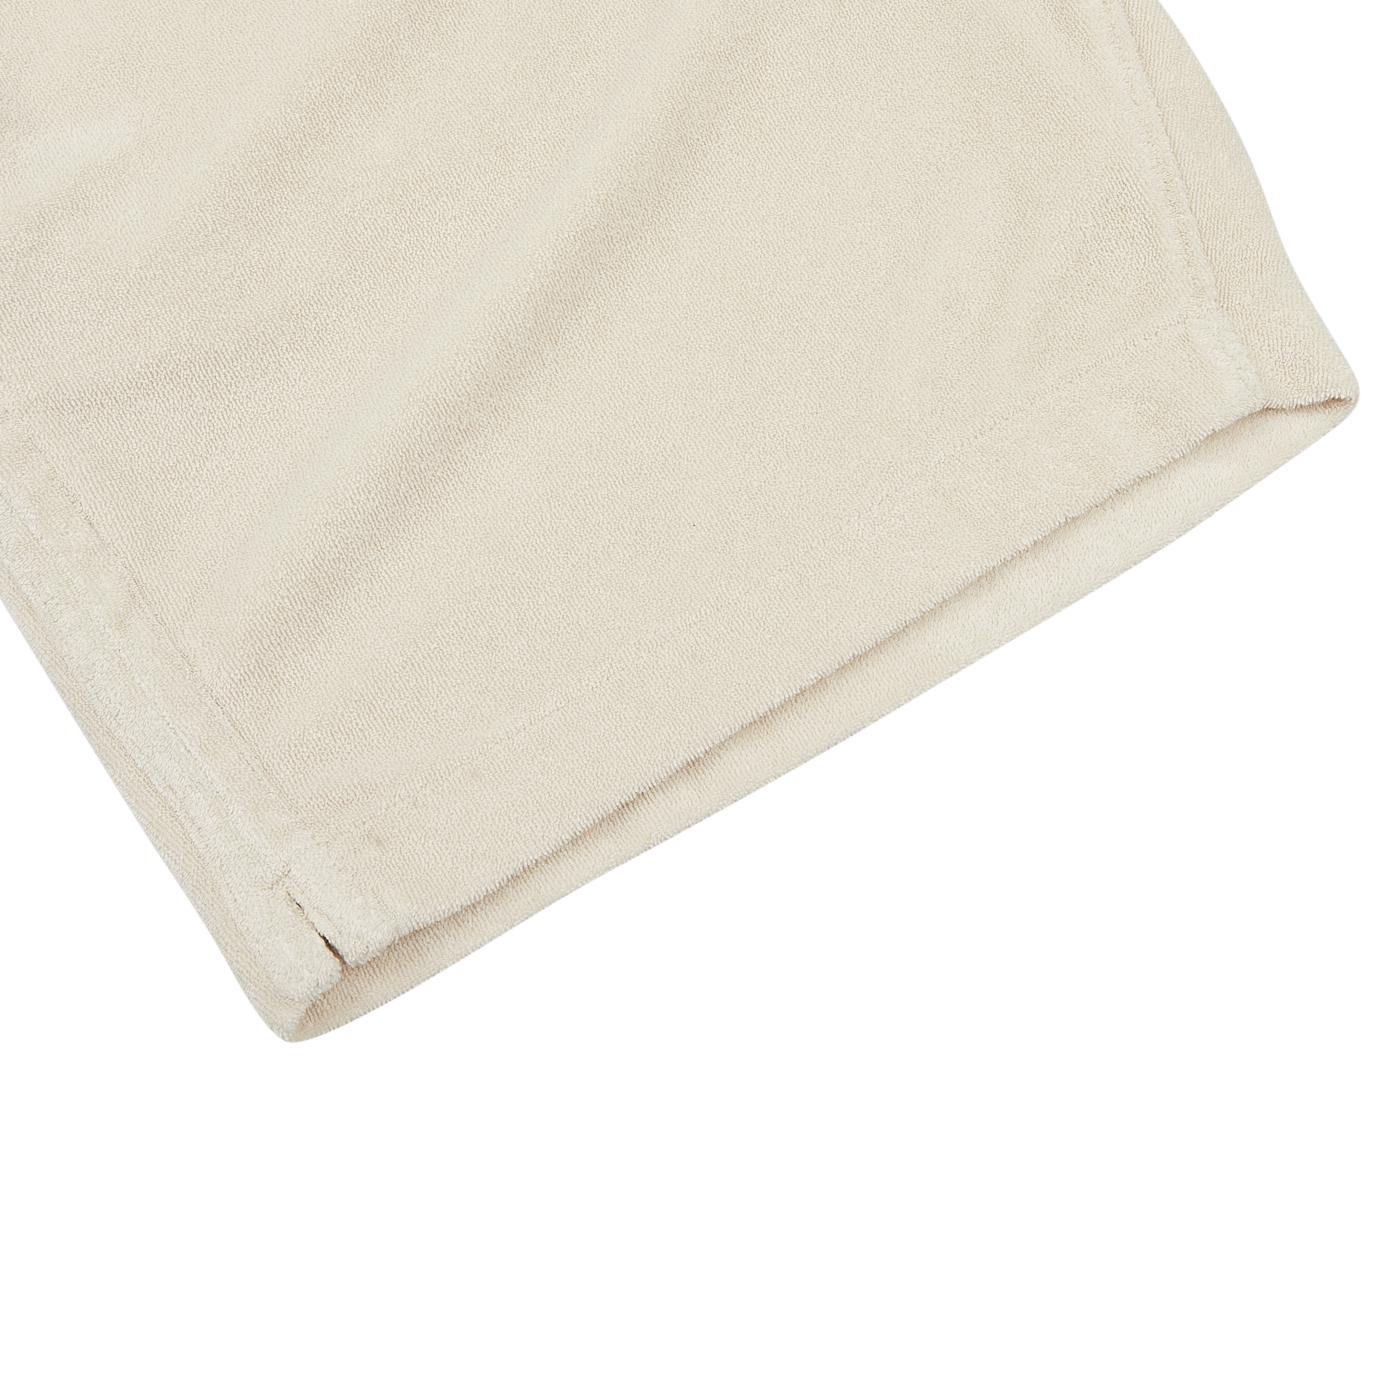 A close-up view of a beige-colored, folded pair of Cream Beige Cotton Towelling Shorts by Paige, made from a towelling cotton blend, on a white surface.